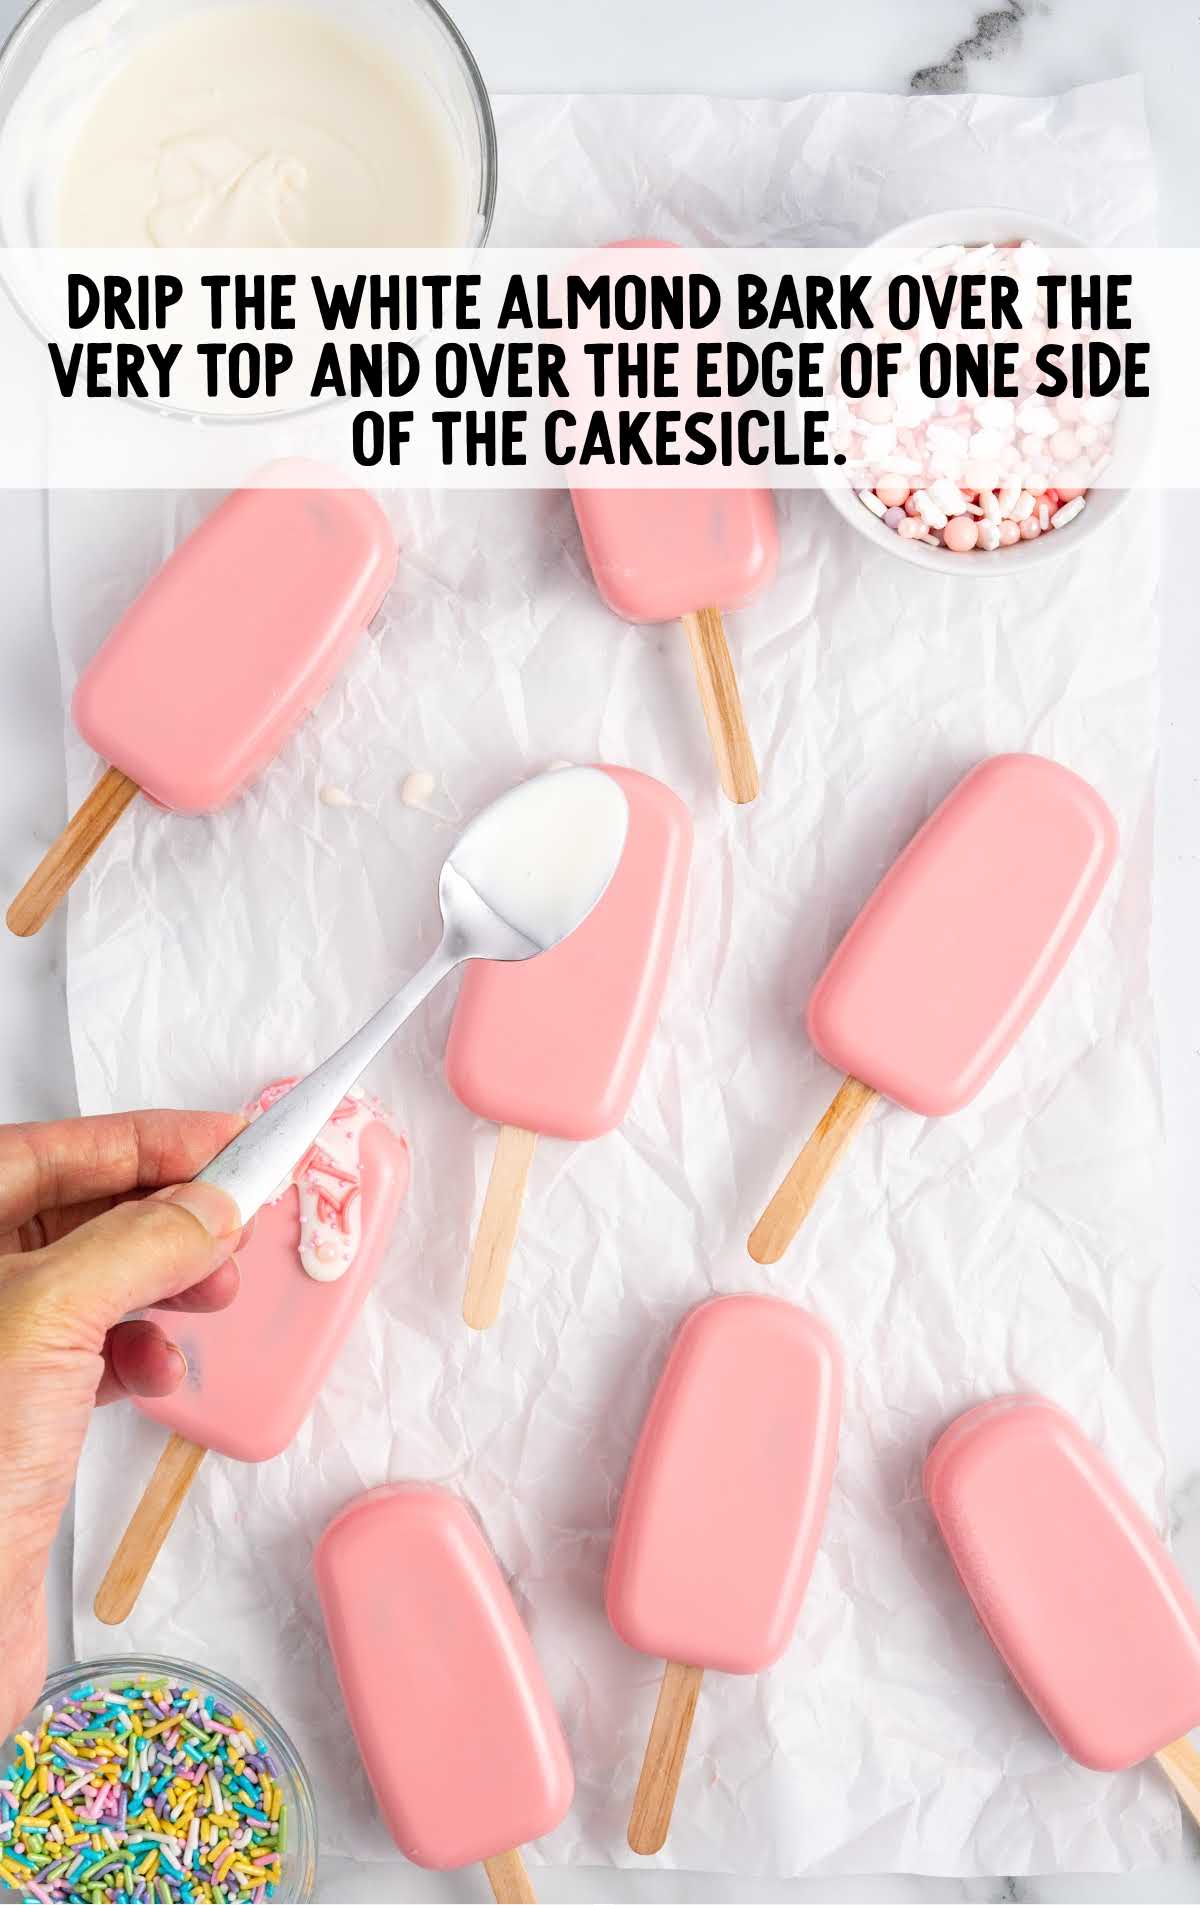 white almond bark dripped over the top and edges of cakesicle